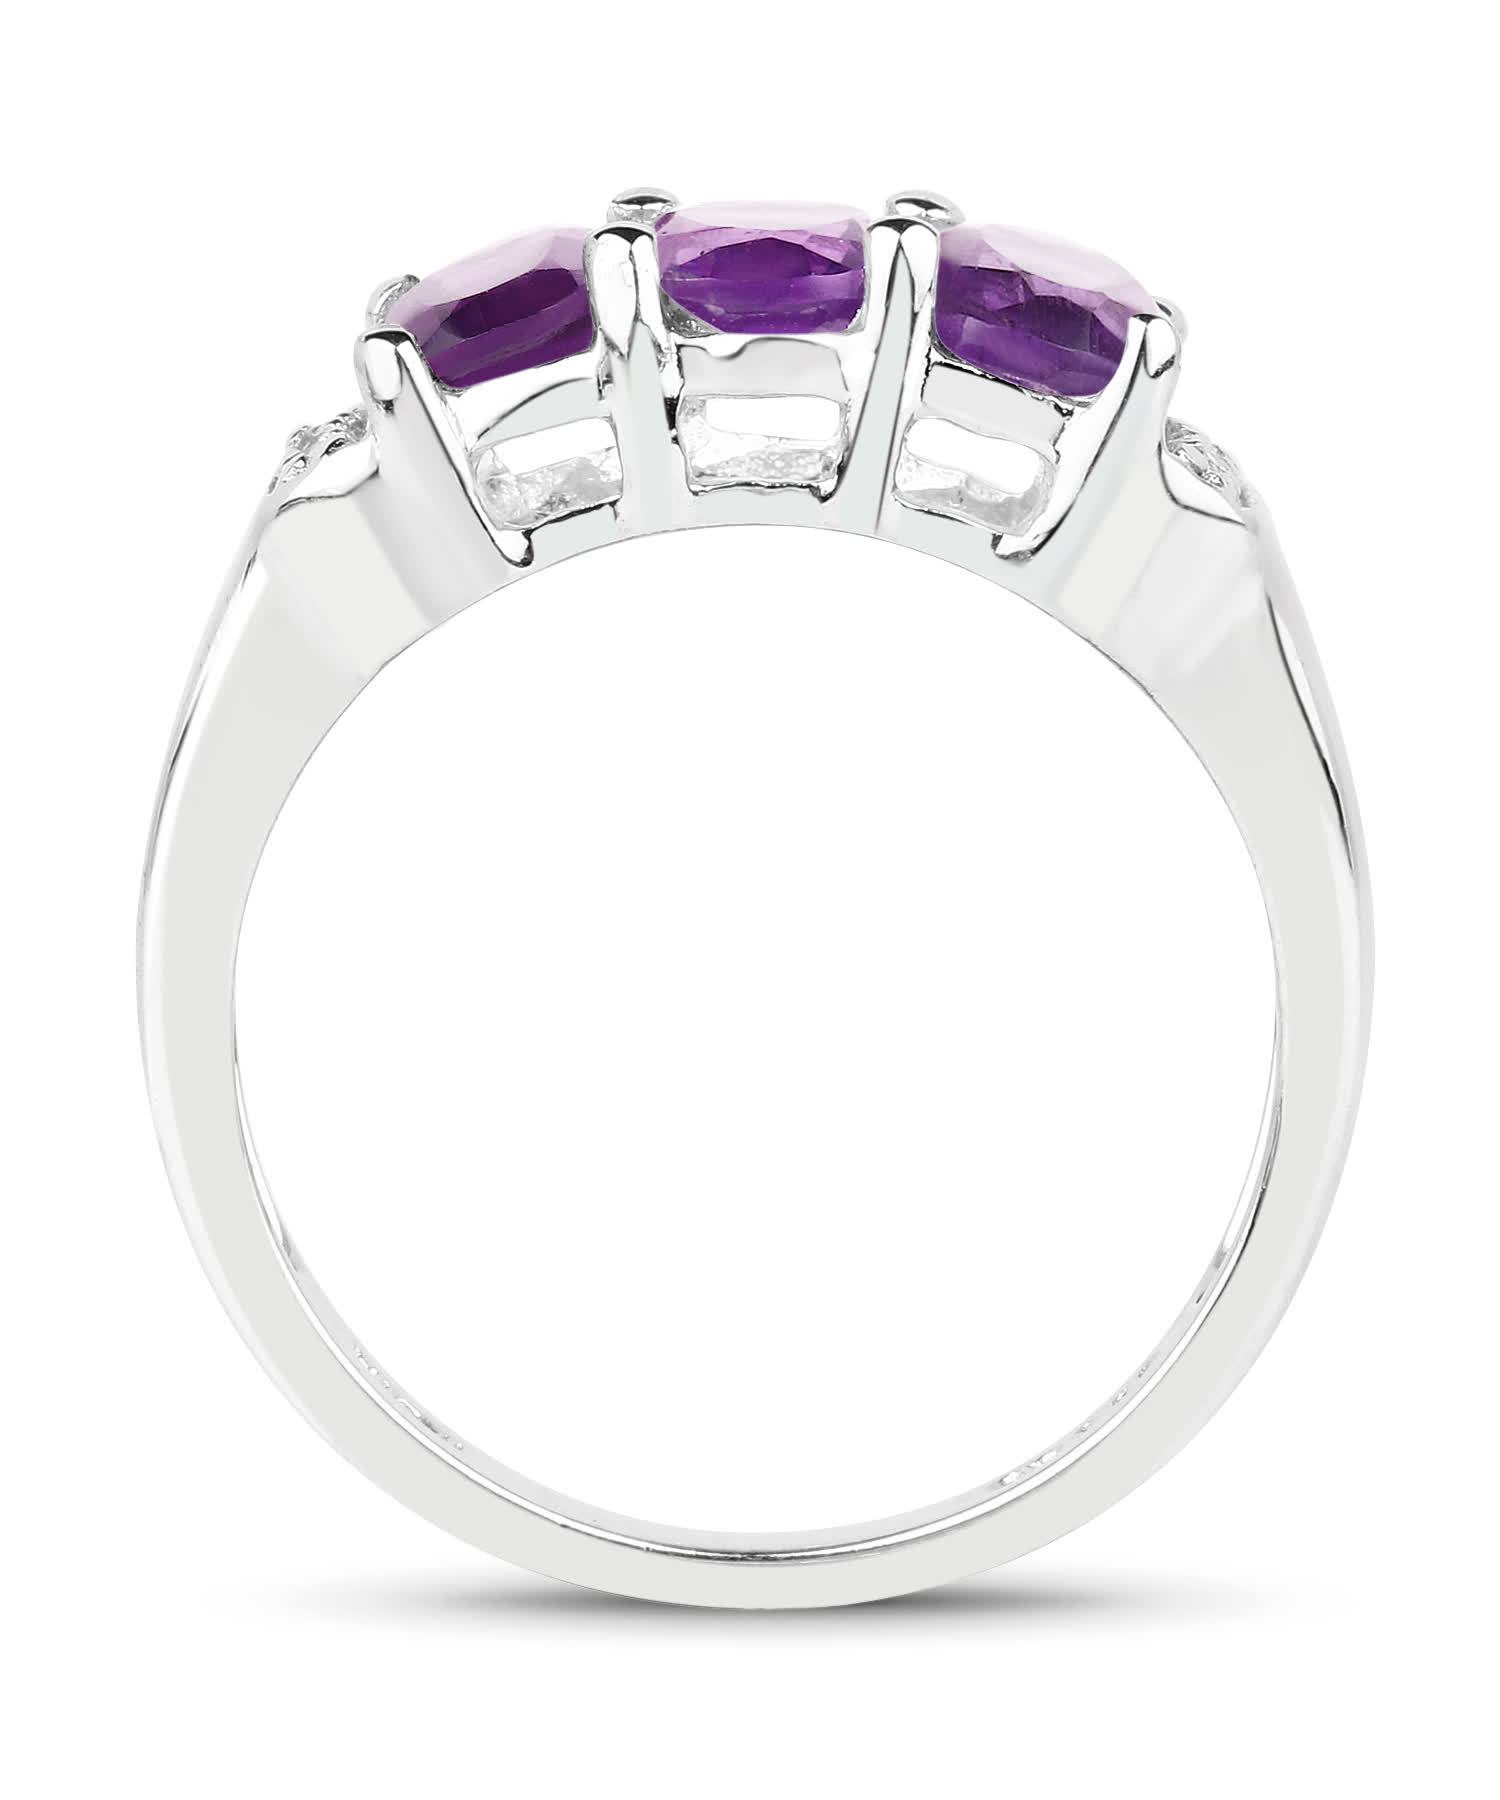 1.54ctw Natural Amethyst and Topaz Rhodium Plated 925 Sterling Silver Three-Stone Right Hand Ring View 2